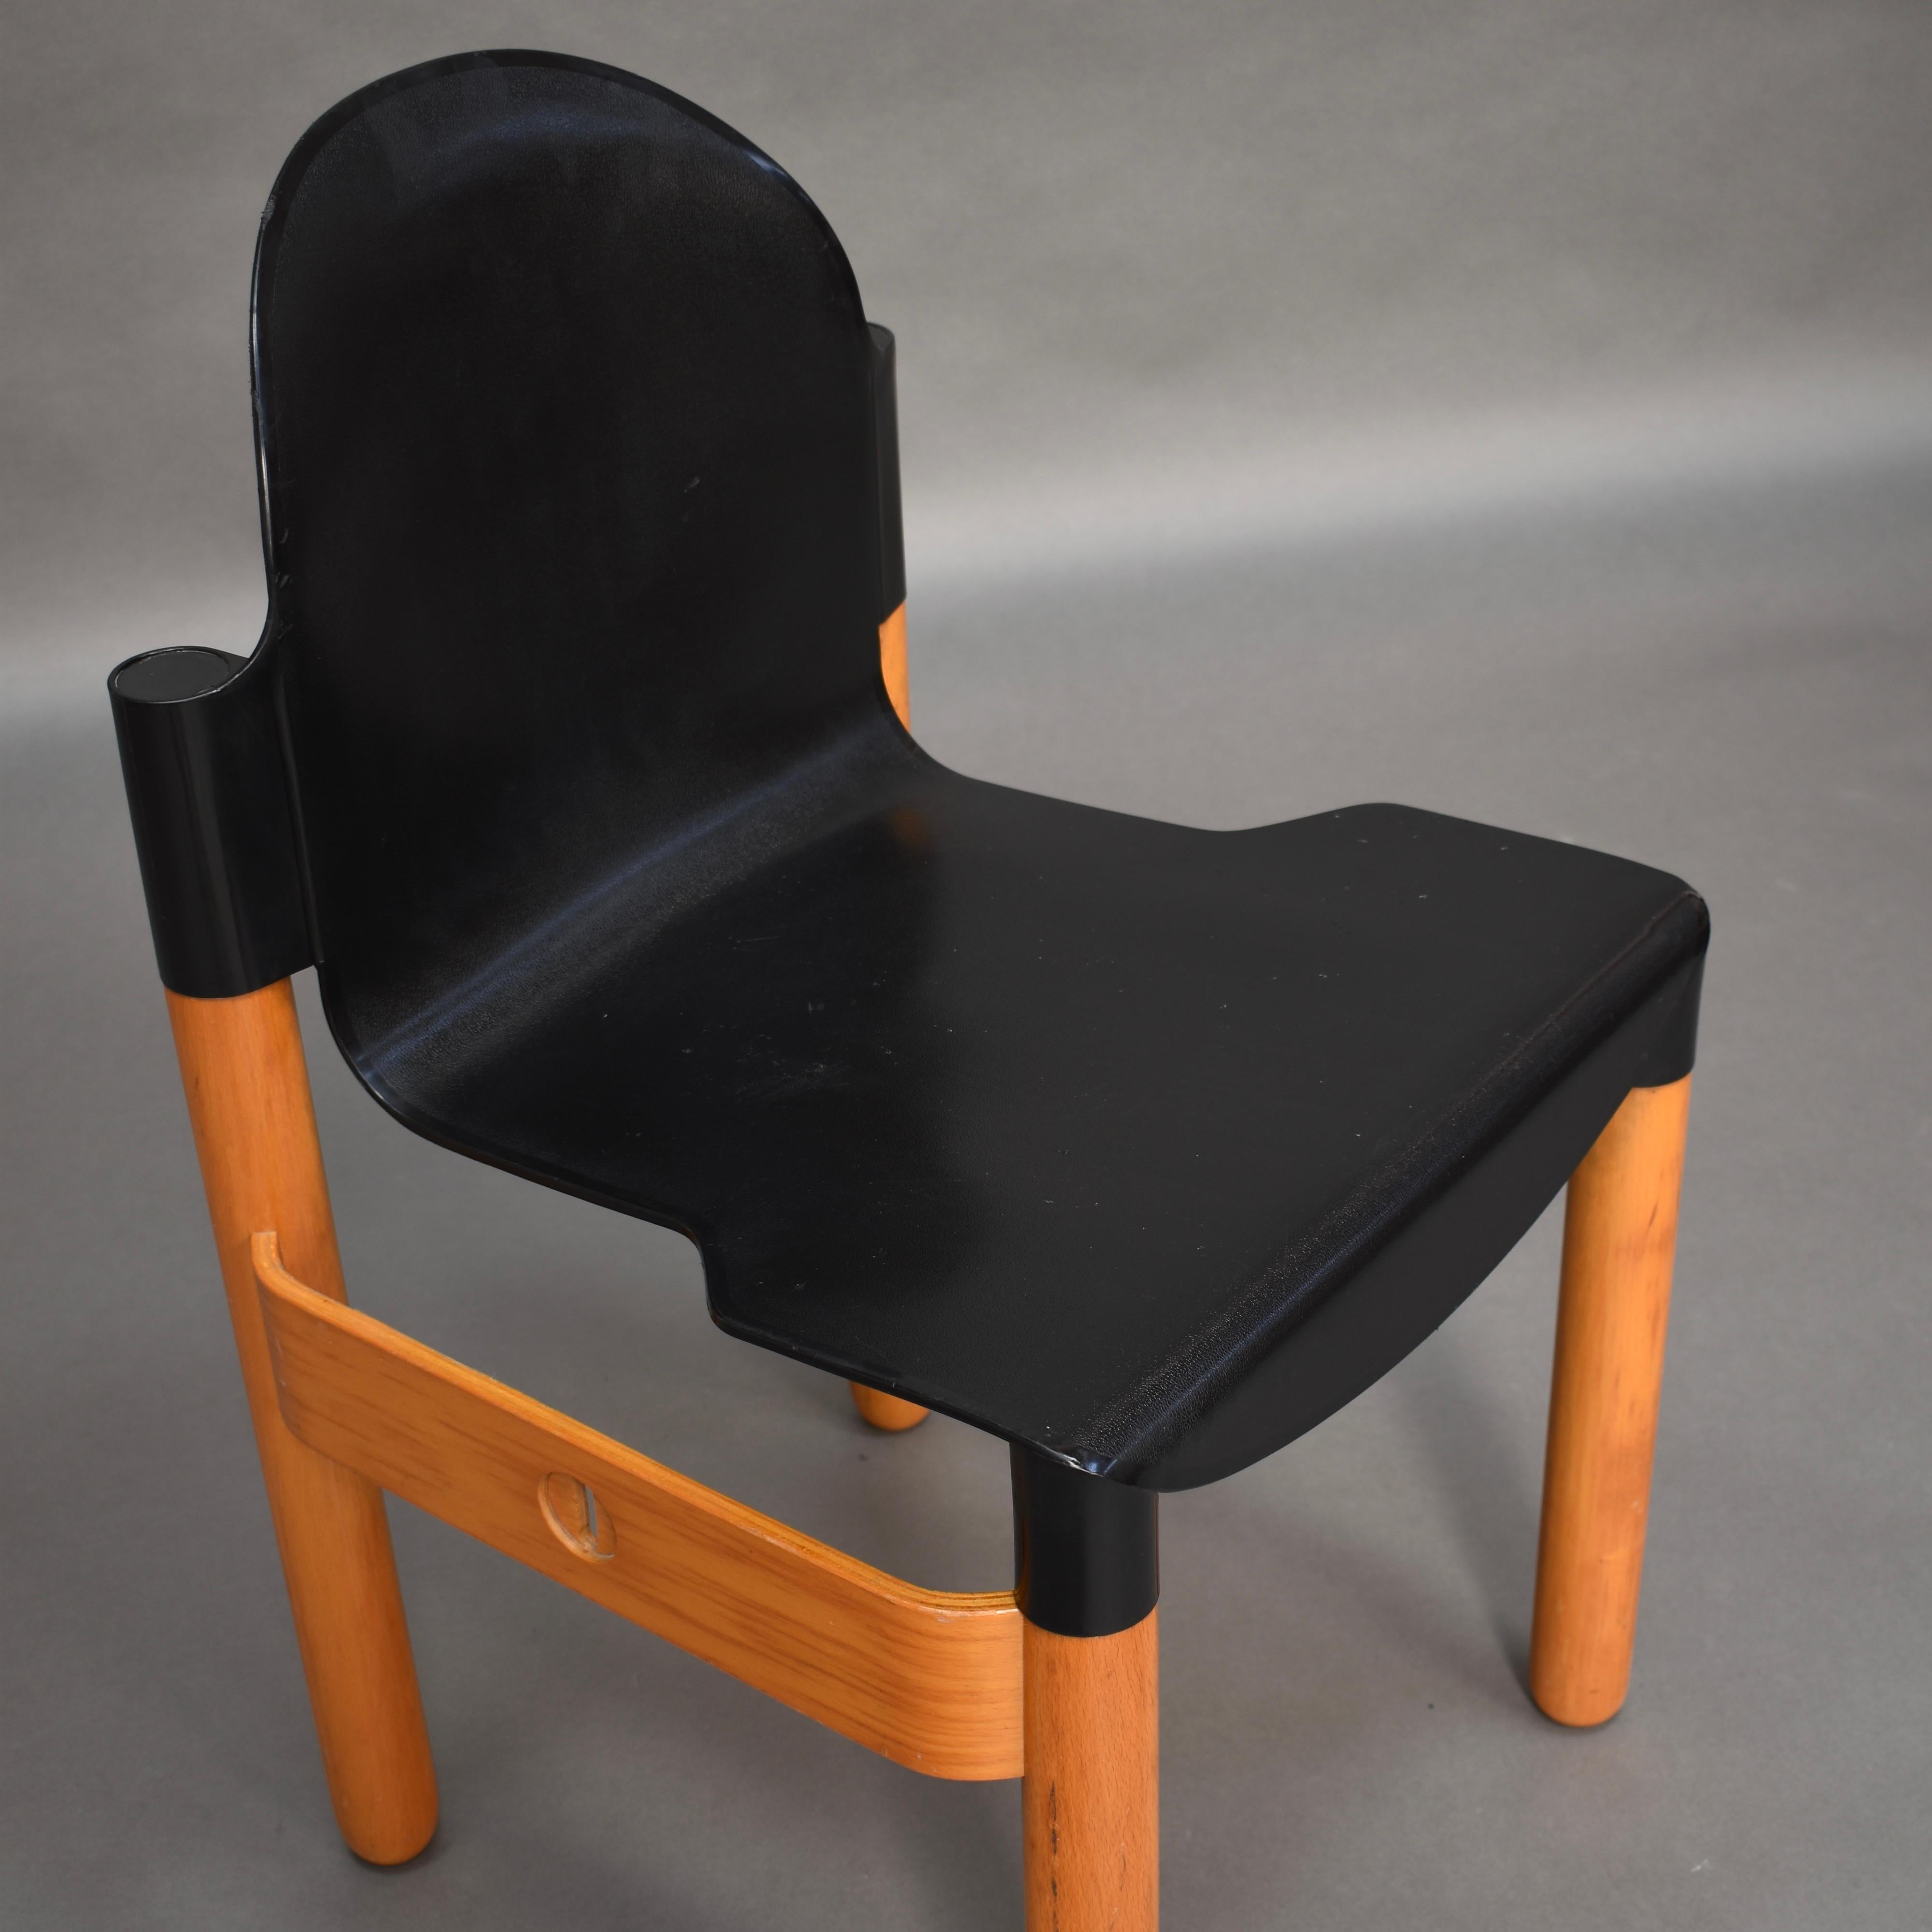 Thonet Chair in Birch and Plastic by Gerd Lange, West-Germany, 1973 For Sale 4